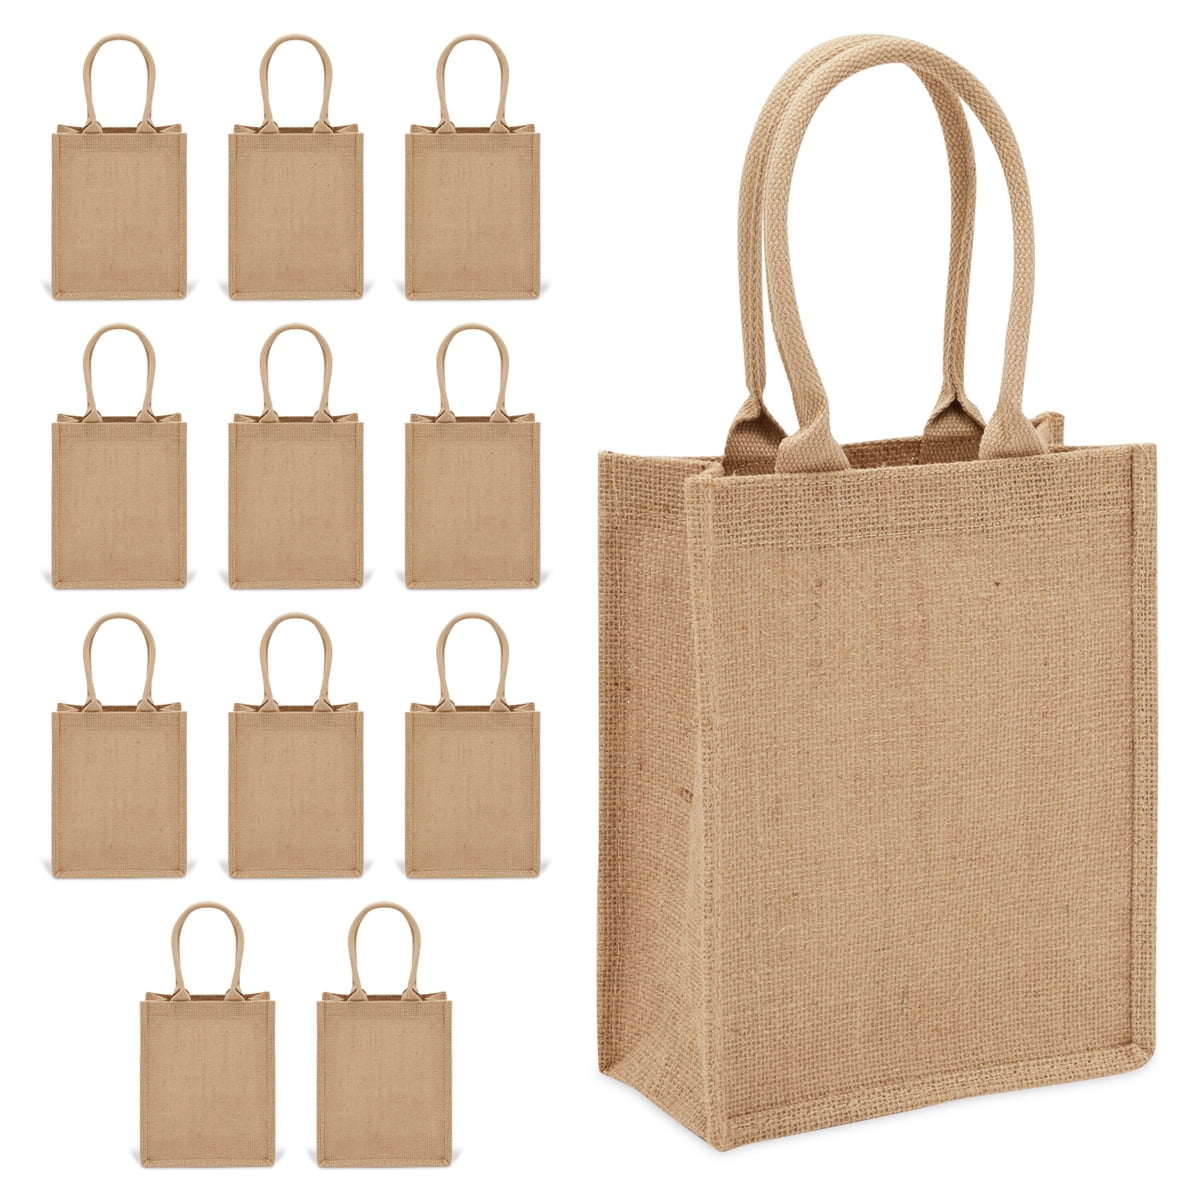 Reusable Grocery Shopping Tote Bag Bags with Gusset Eco Friendly 13x15" 